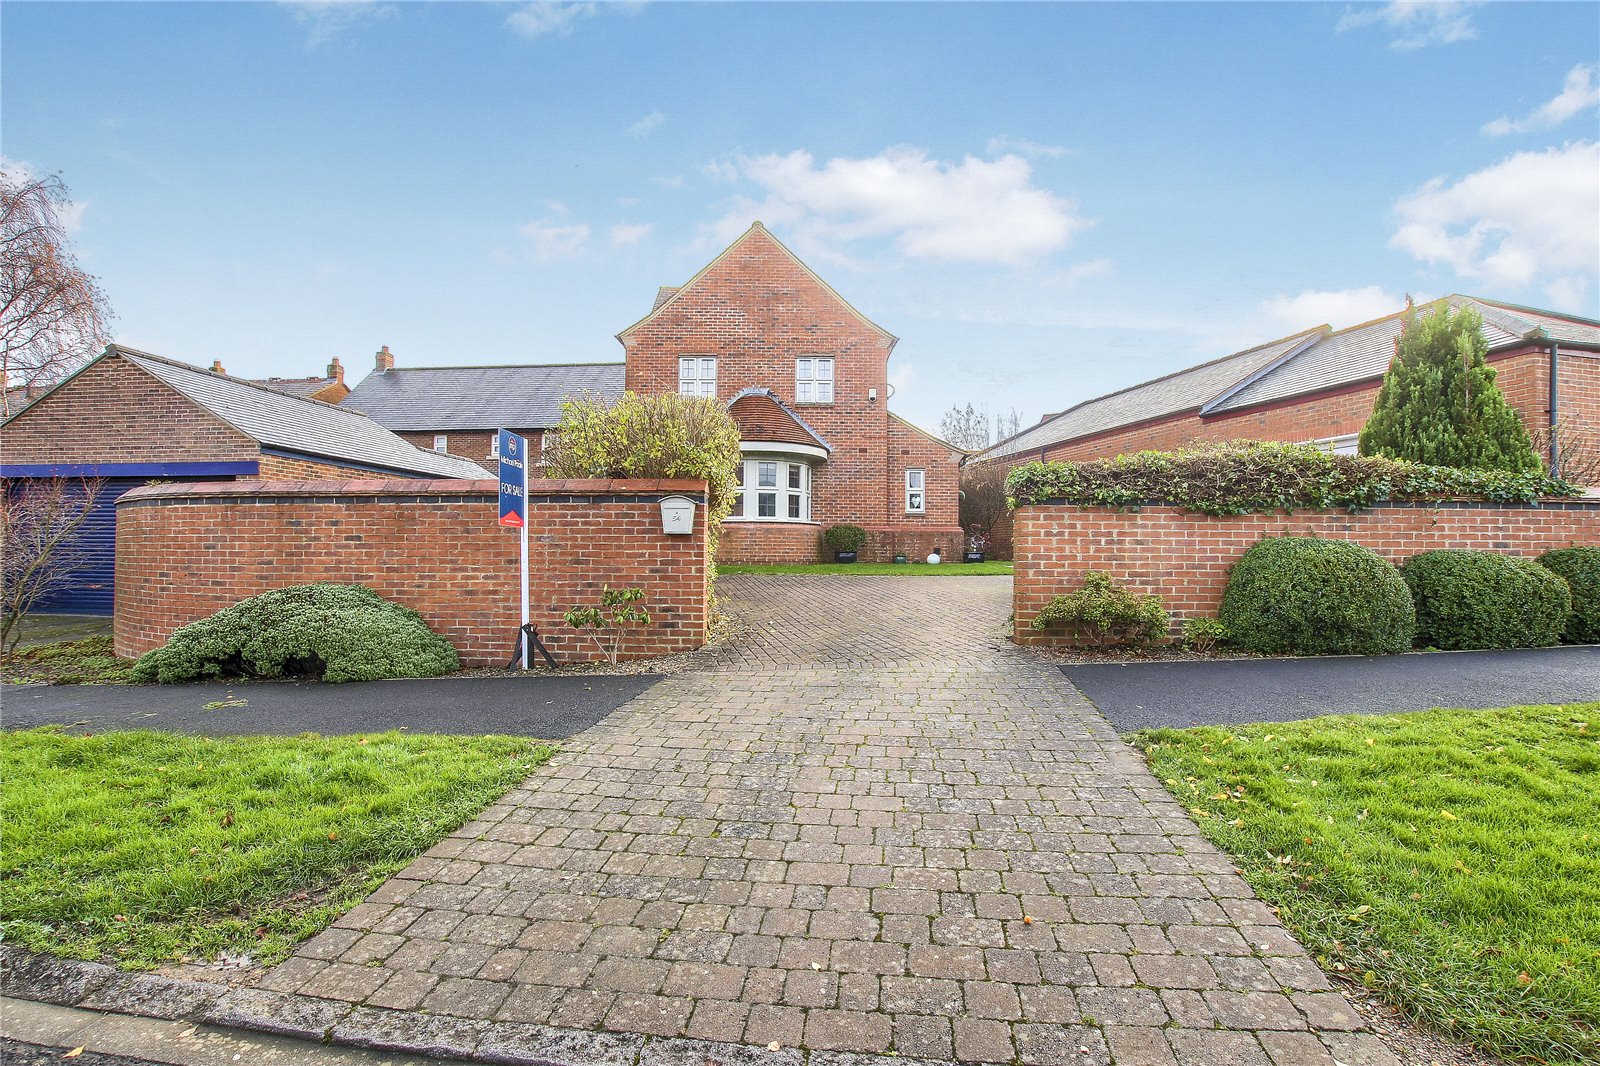 4 bed house for sale in The Stables, Wynyard Village 1